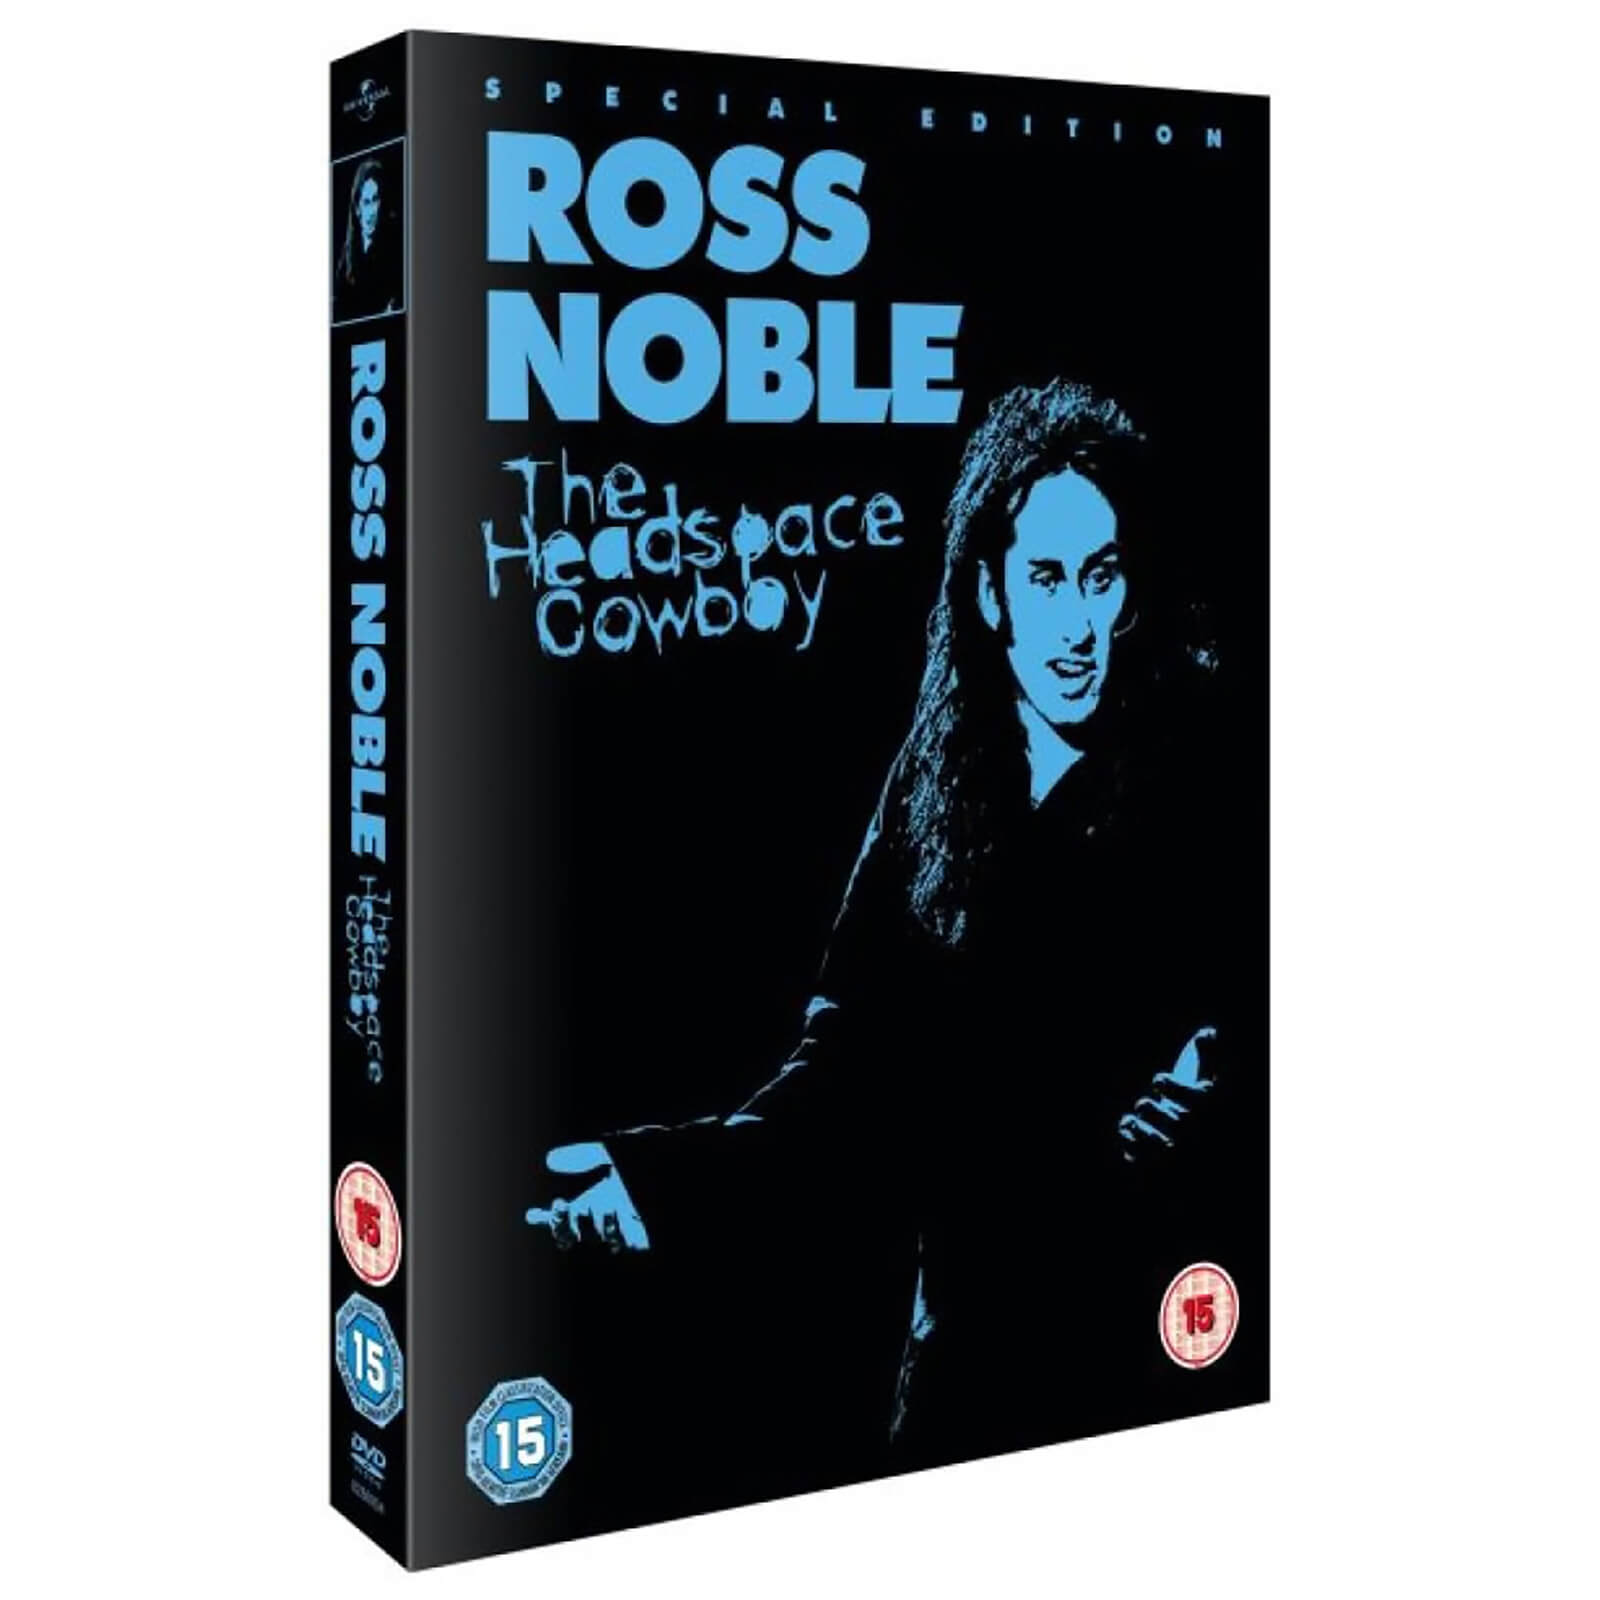 Ross Noble : Headspace Cowboy (edition speciale)